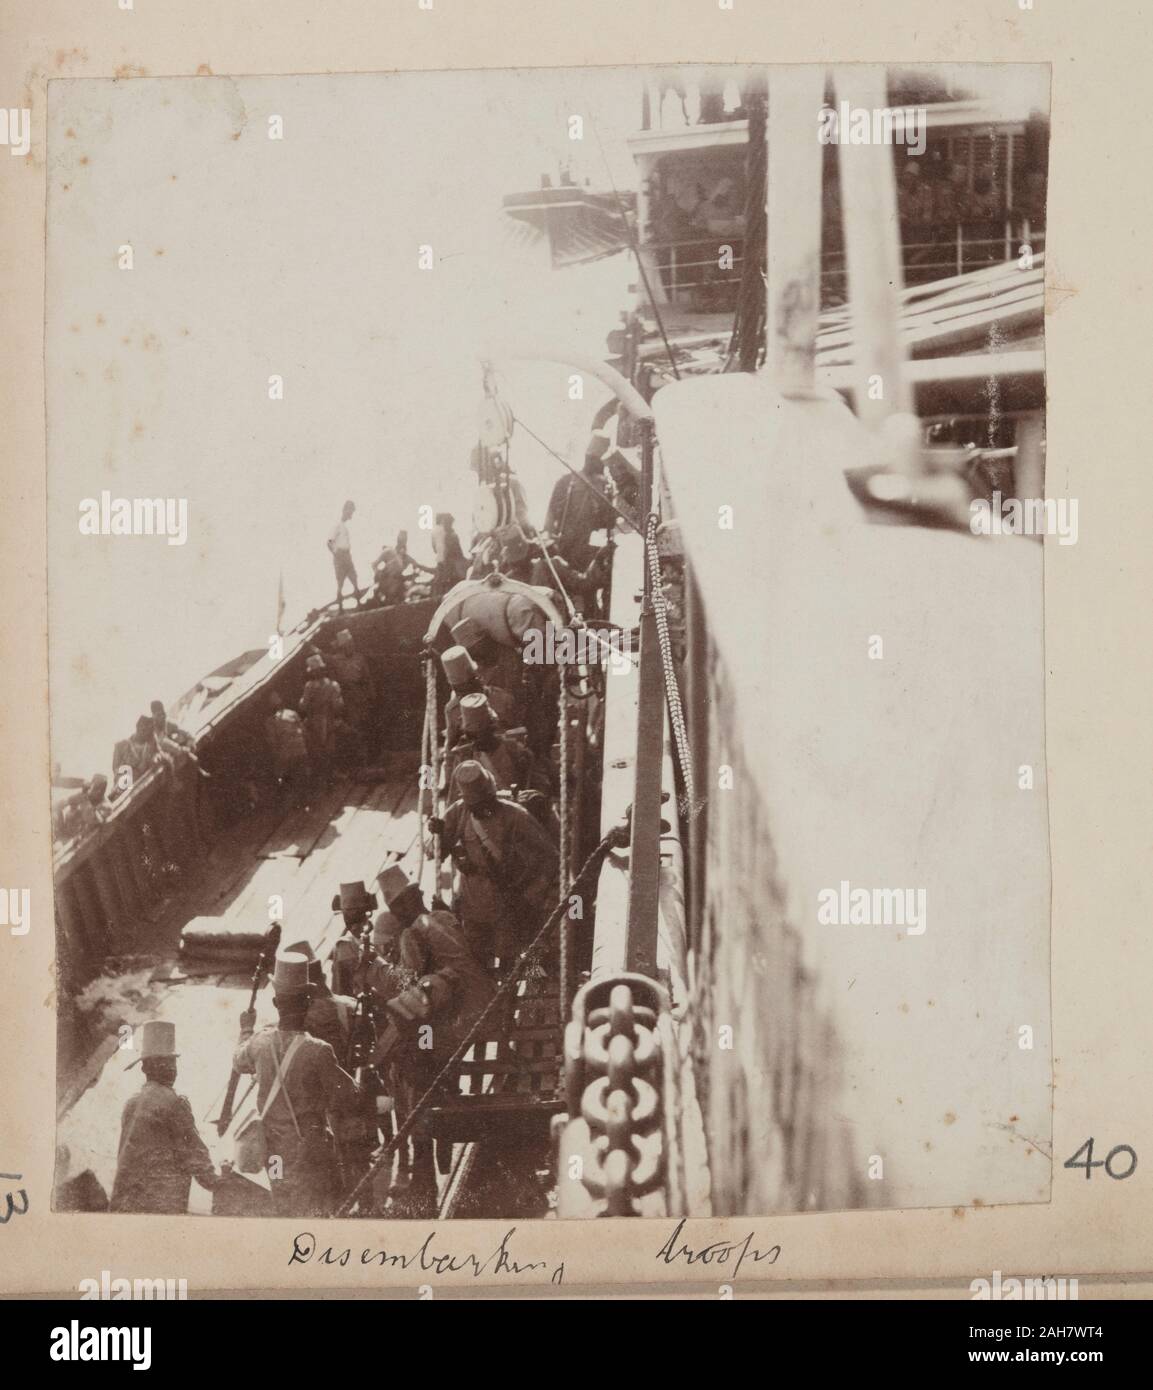 SomaliaJubaland, Troops on deck of ship photographed from above ...